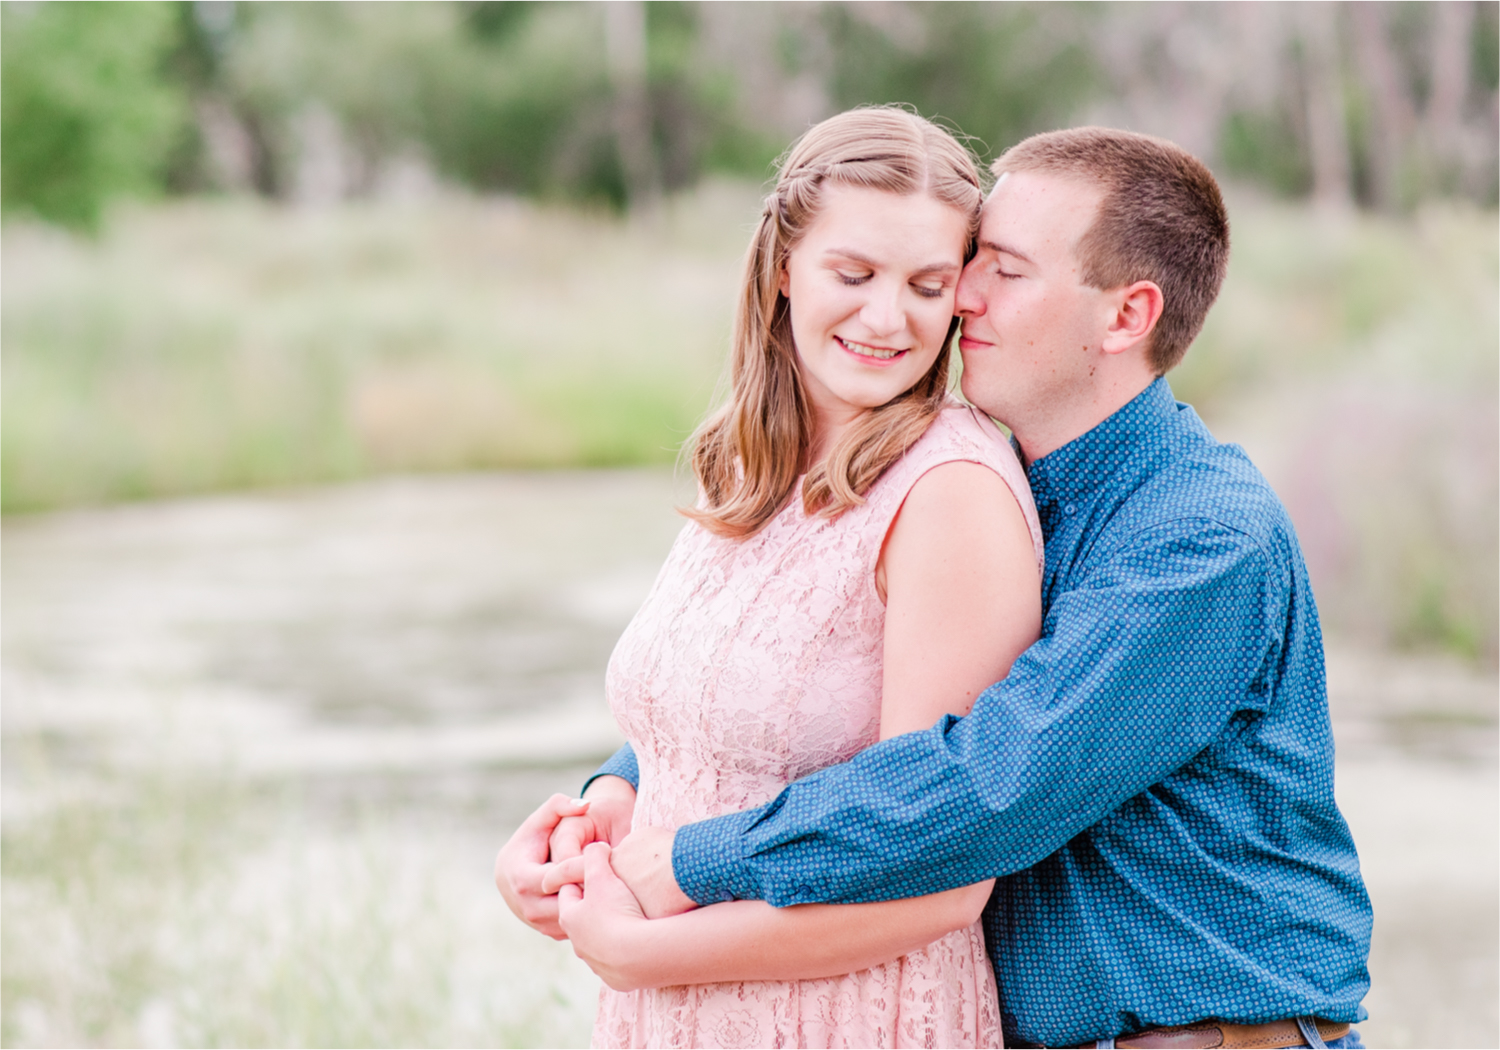 Summer Engagement Session at Sandstone Ranch in Longmont Colorado near Boulder | Britni Girard Photography | Country Engagement